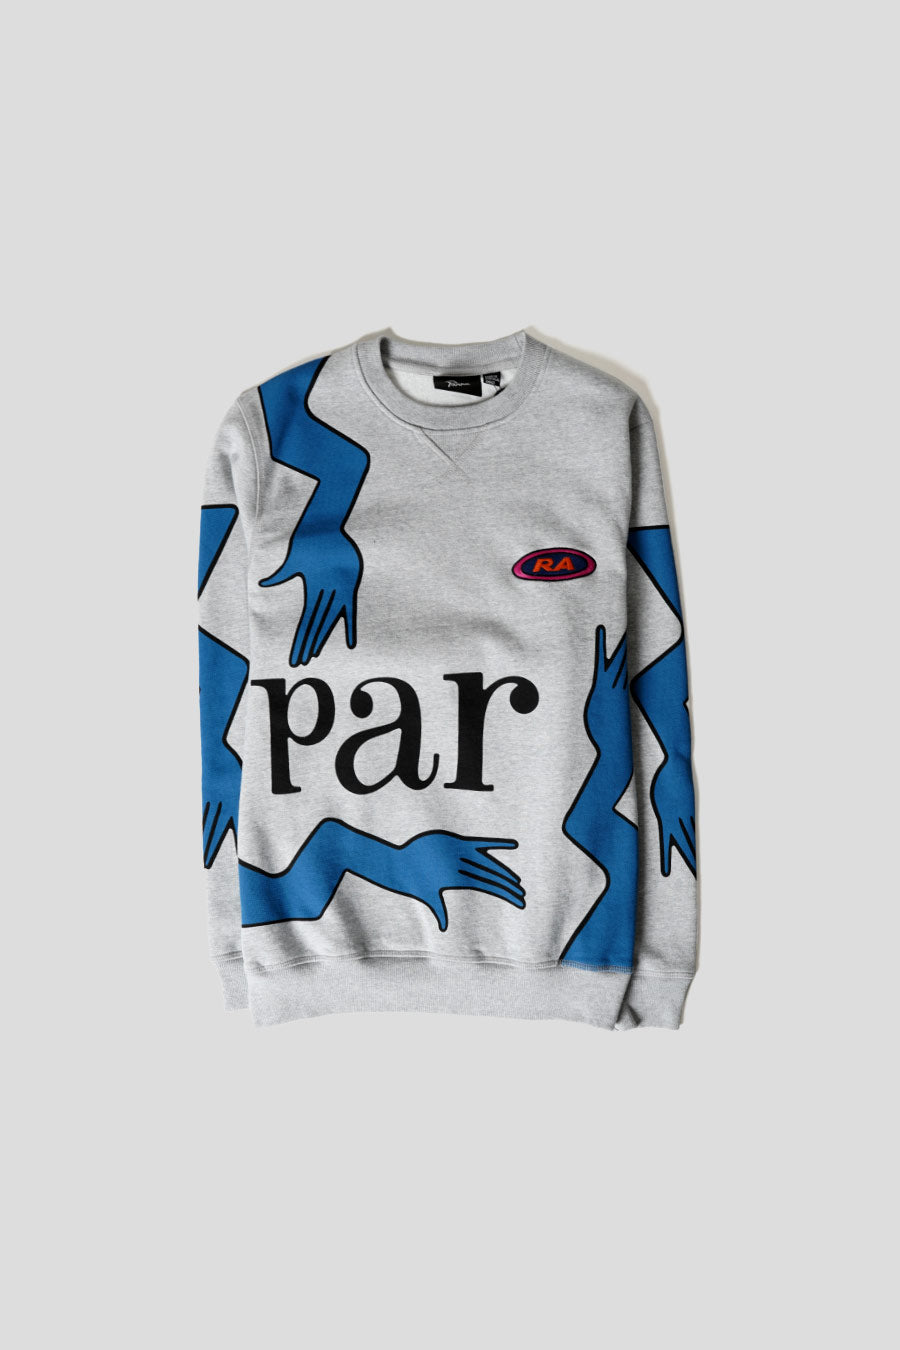 BY PARRA - EARLY GRAB GREY SWEATSHIRT - LE LABO STORE